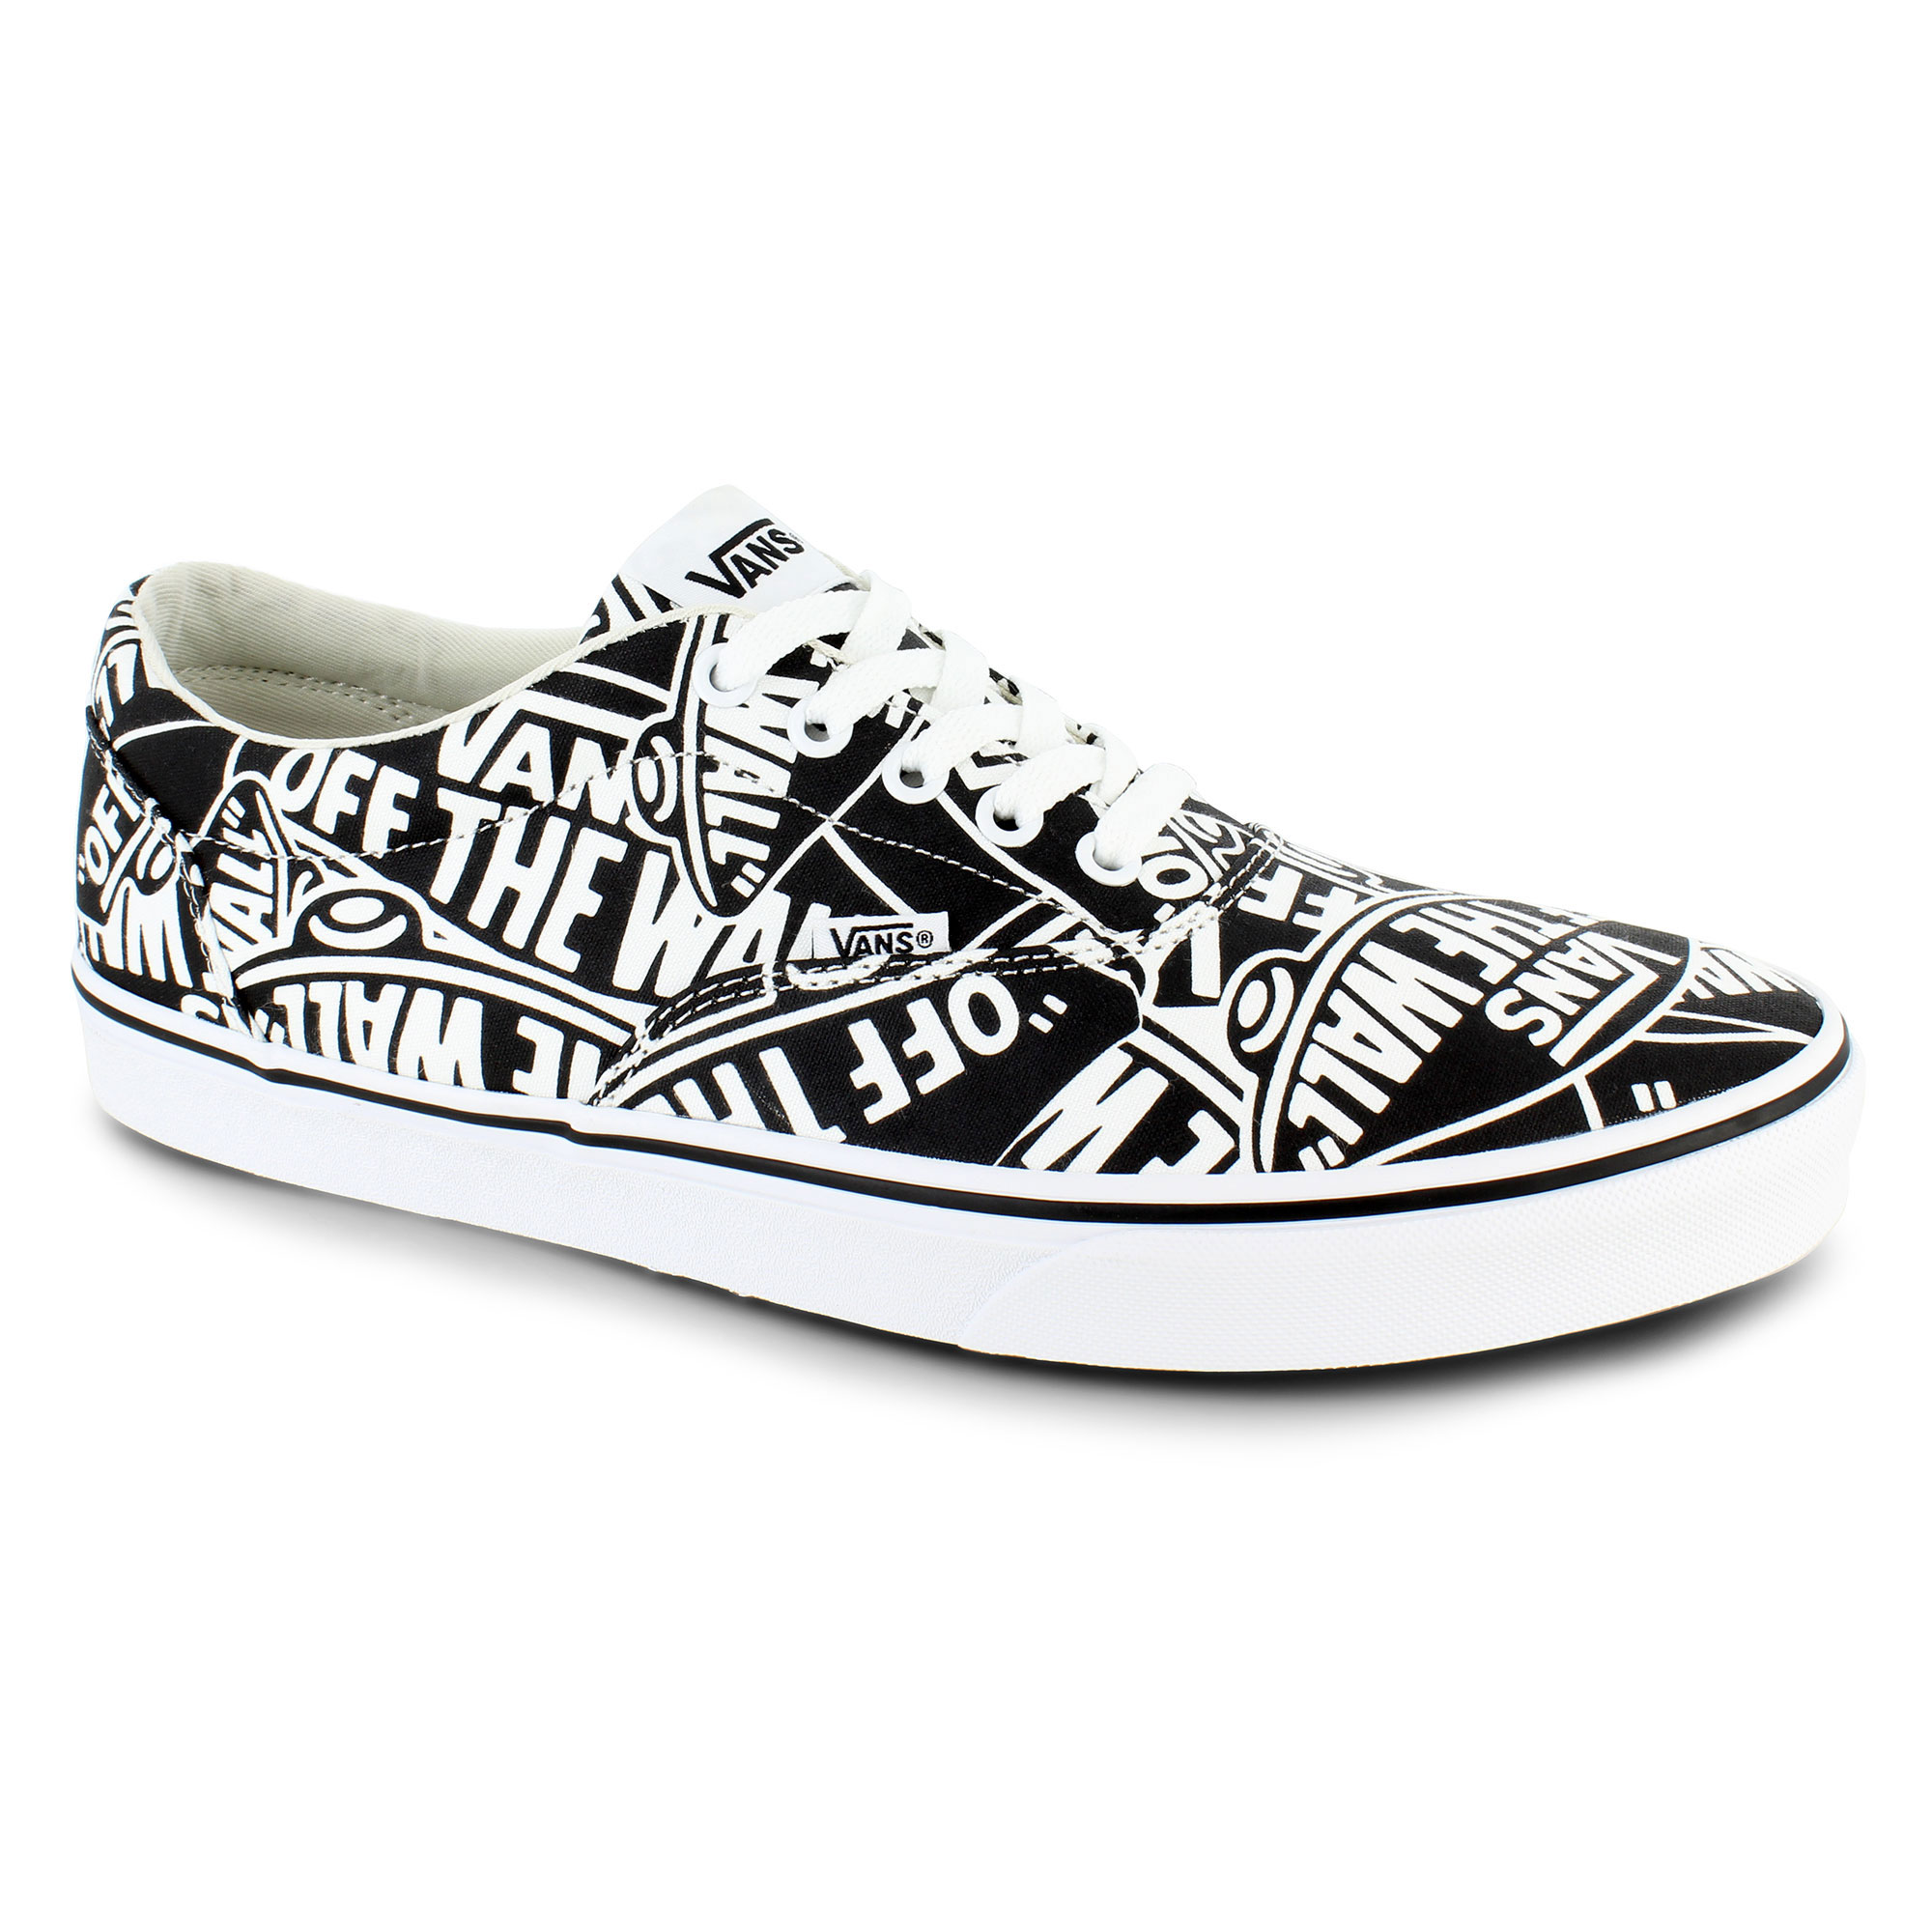 off wall vans \u003e Up to 79% OFF \u003e In stock